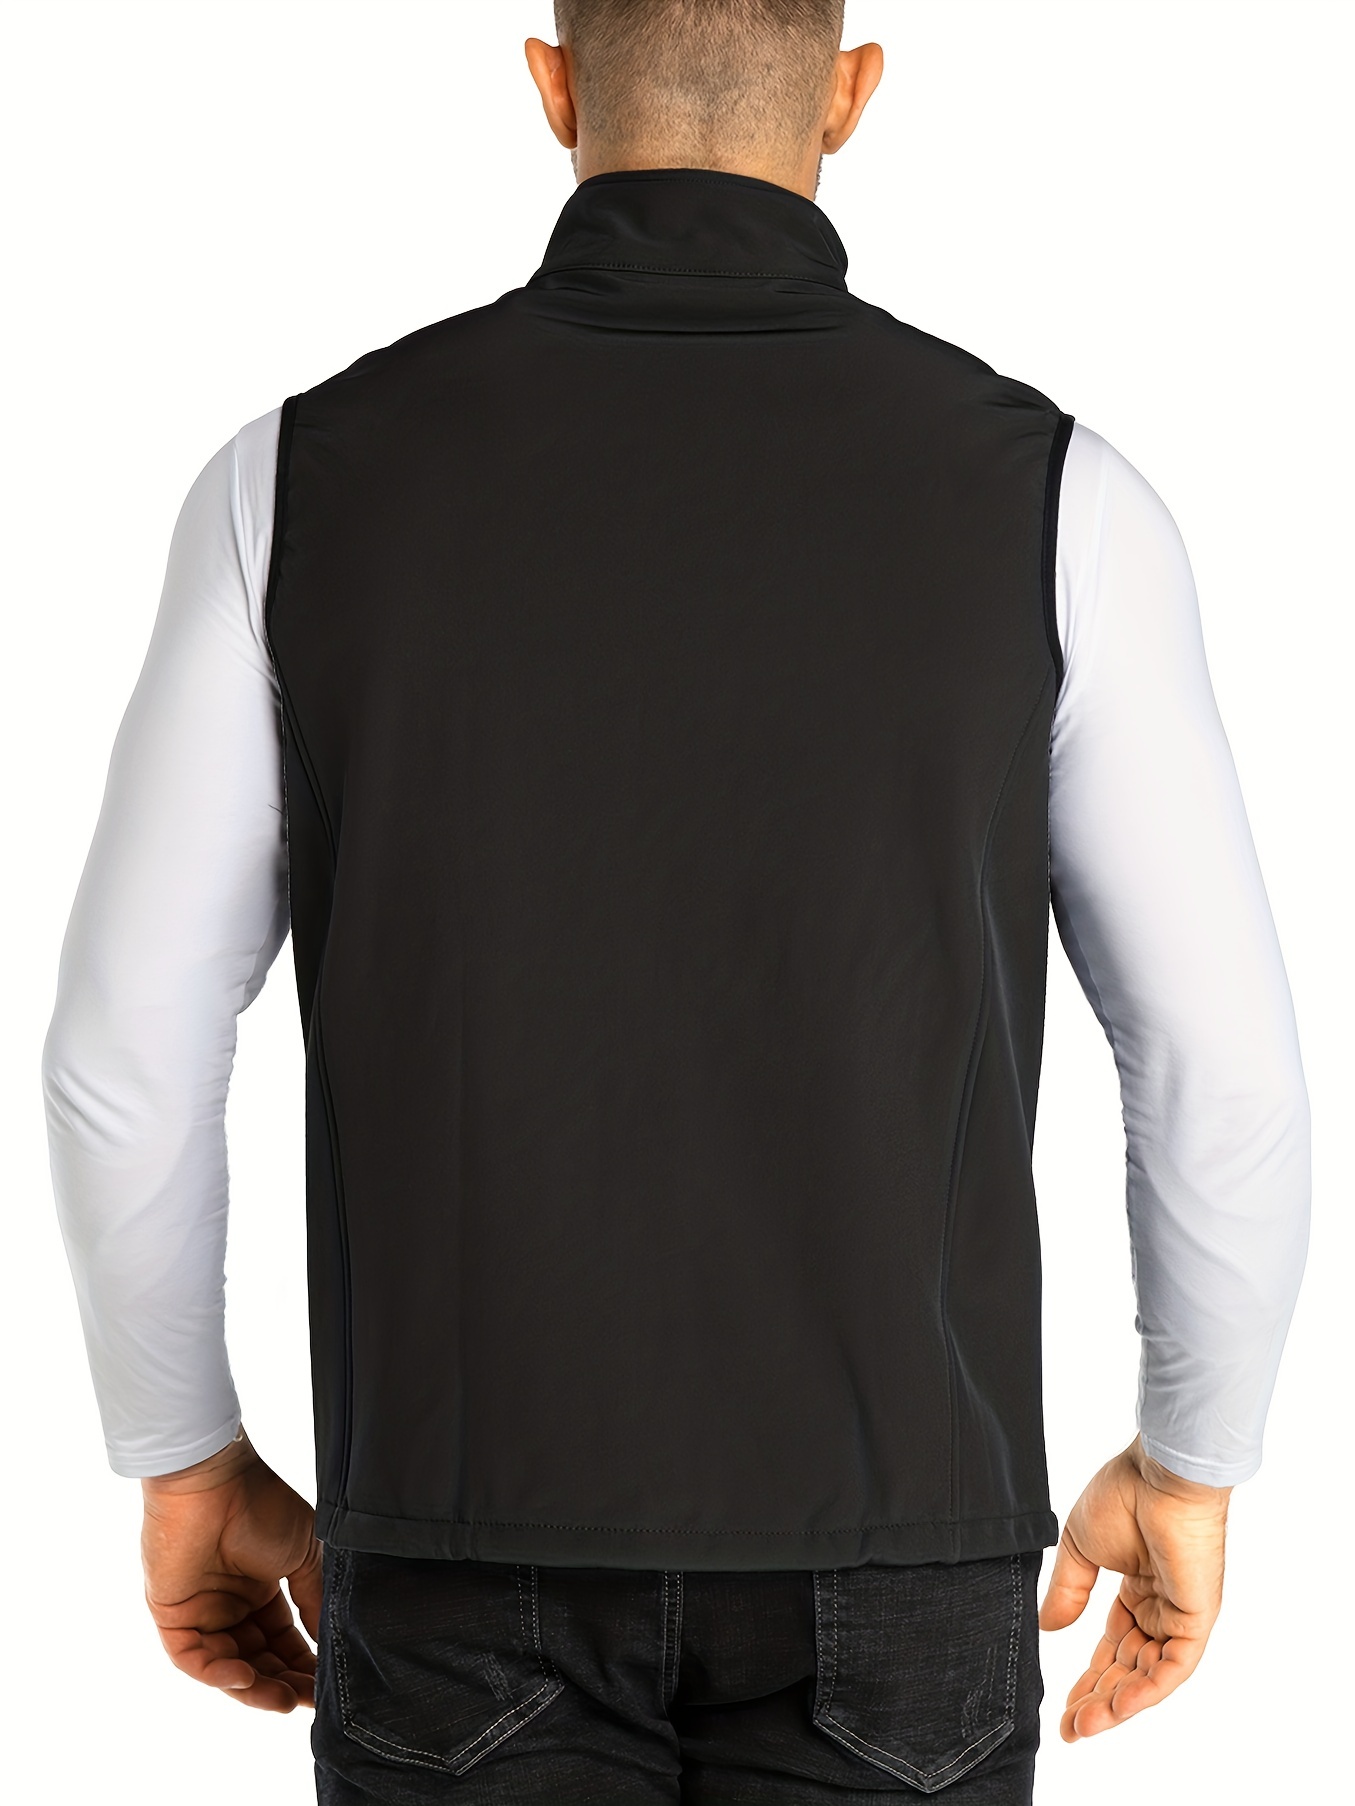 33, 000ft Men's Soft-shell Vest: Active Stand Collar, Fleece Lined,  Windproof Zip Up Jacket - Perfect For Golf, Running, Hiking & Fishing!